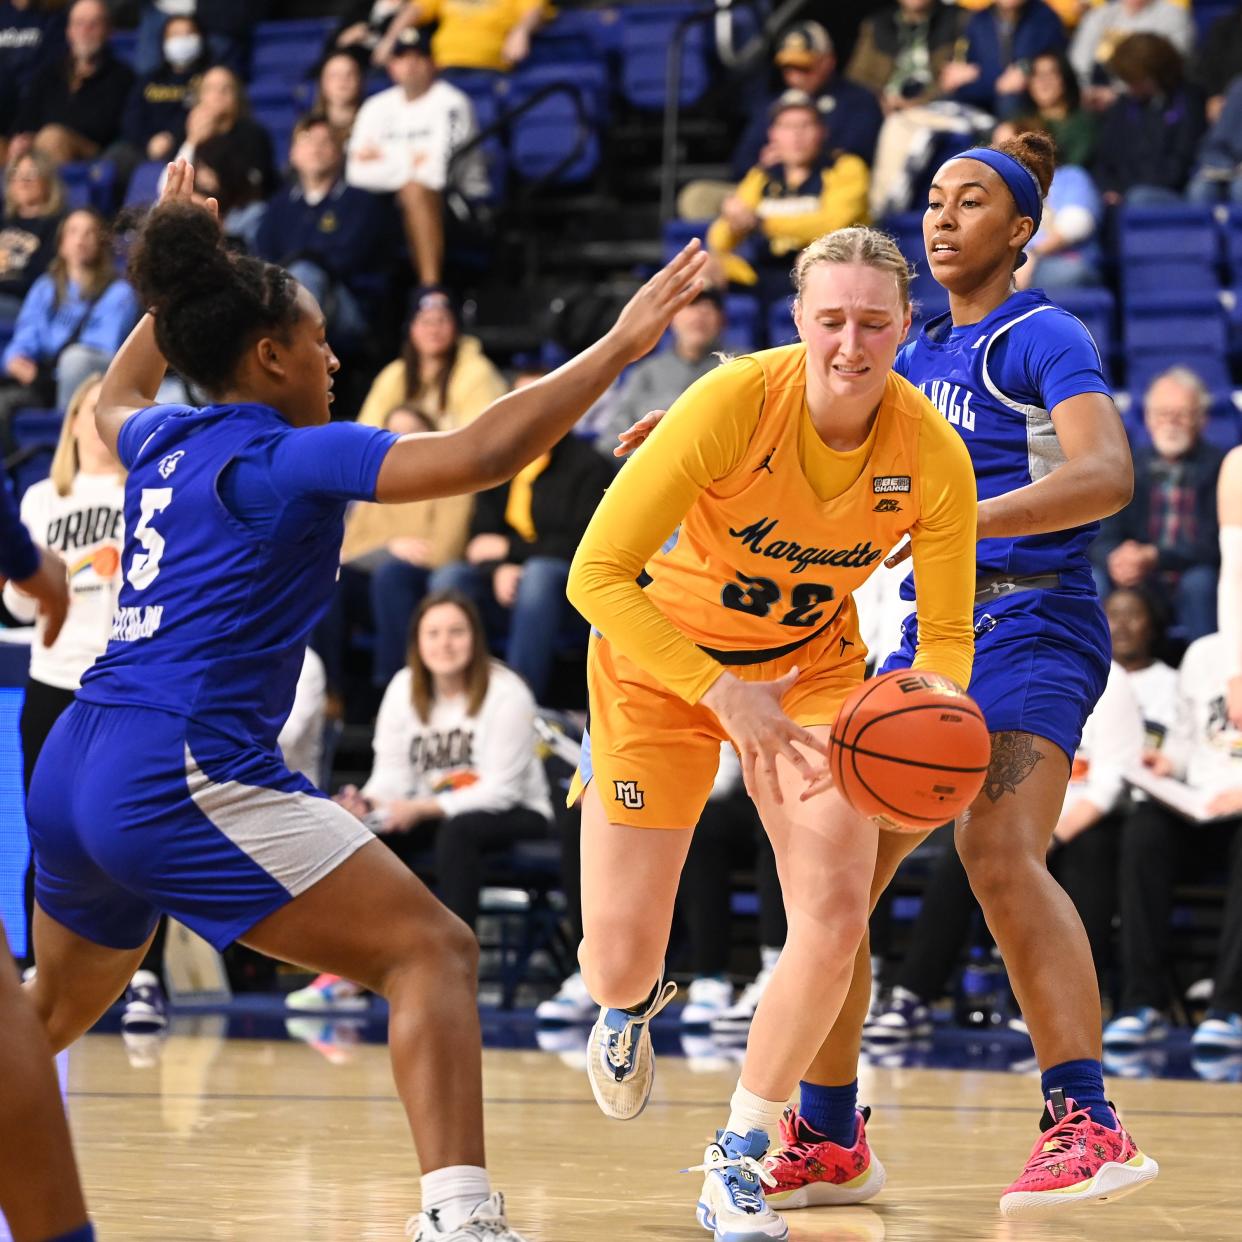 Marquette's Liza Karlen will play fifth season of college basketball at Notre Dame.